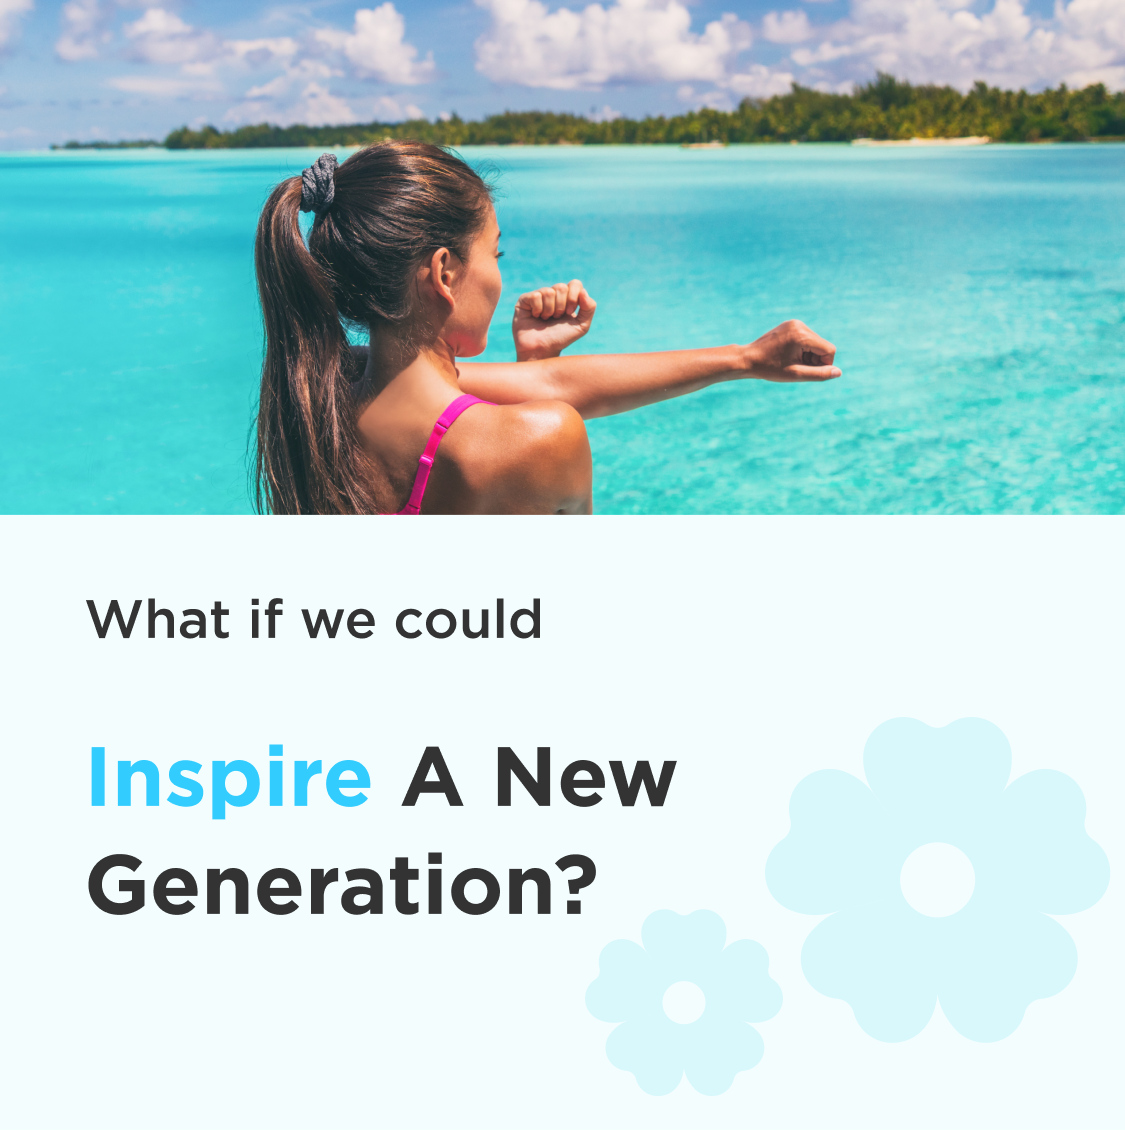 ACF inspire a new generation